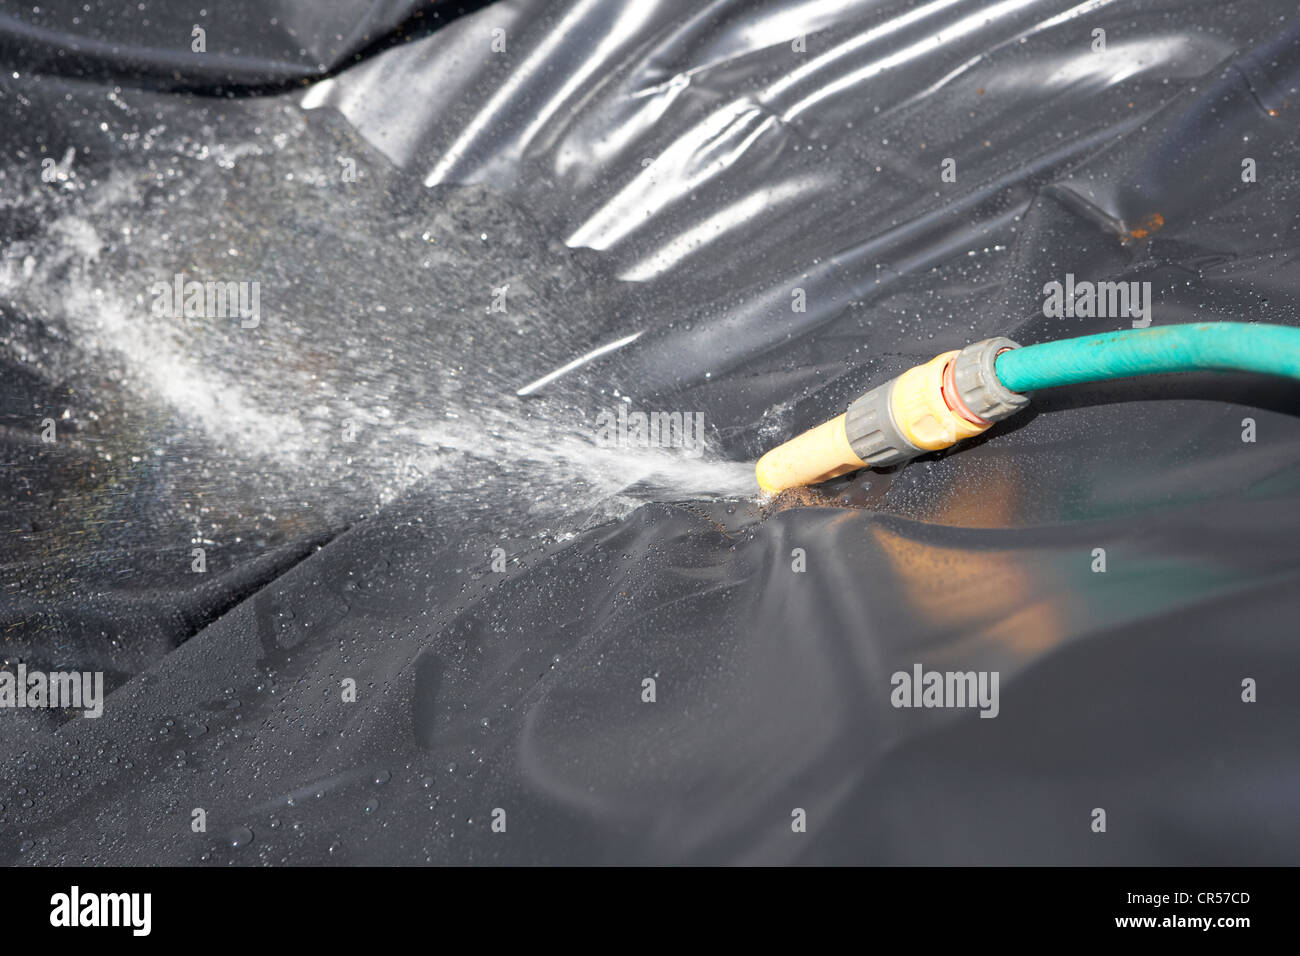 using a hose to fill a hole lined with a pond liner to create a pond in a garden in the uk Stock Photo